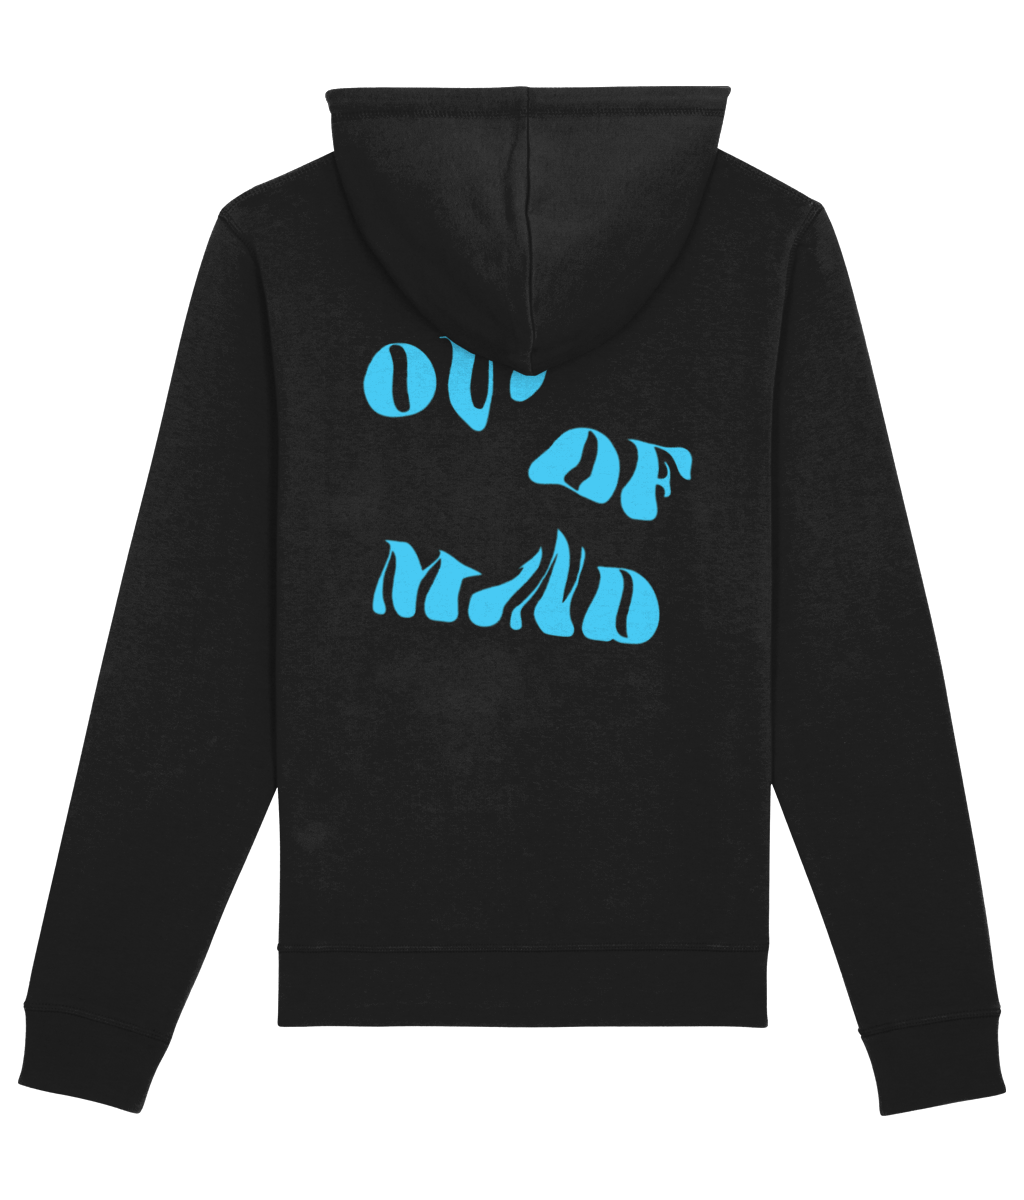 OUT OF MIND HOODIE (LIGHT BLUE)